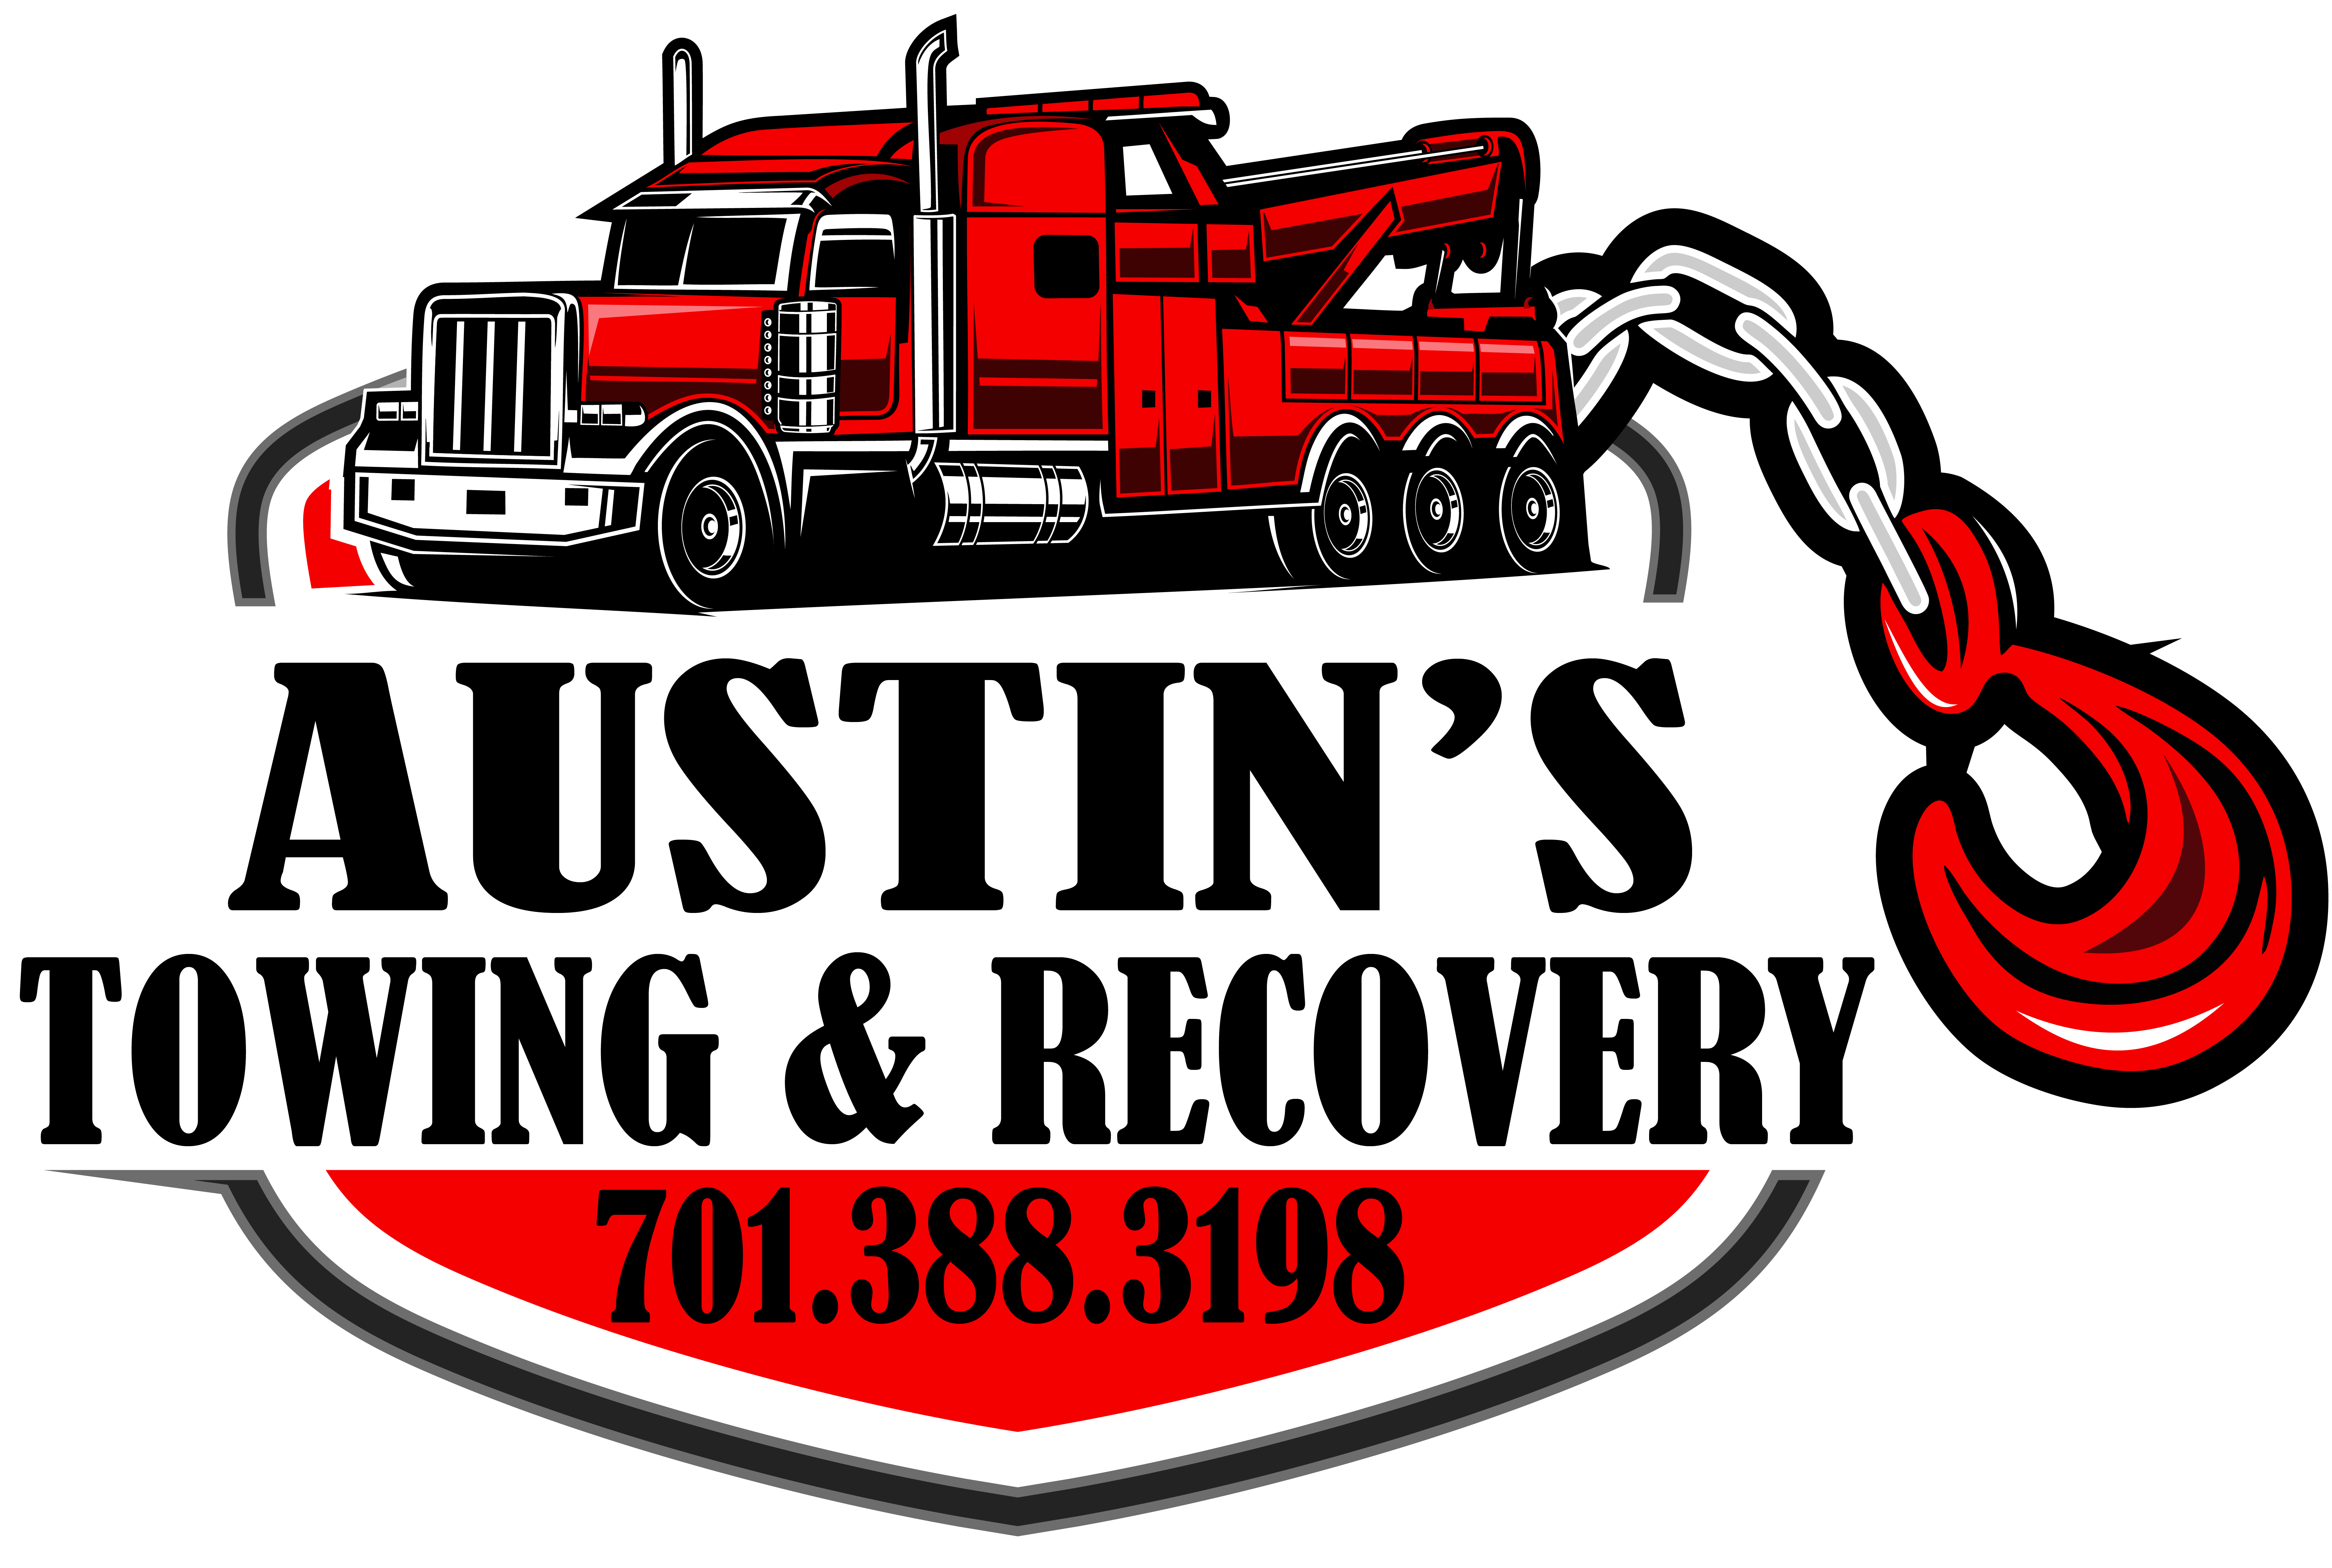 Austin's Towing & Recovery